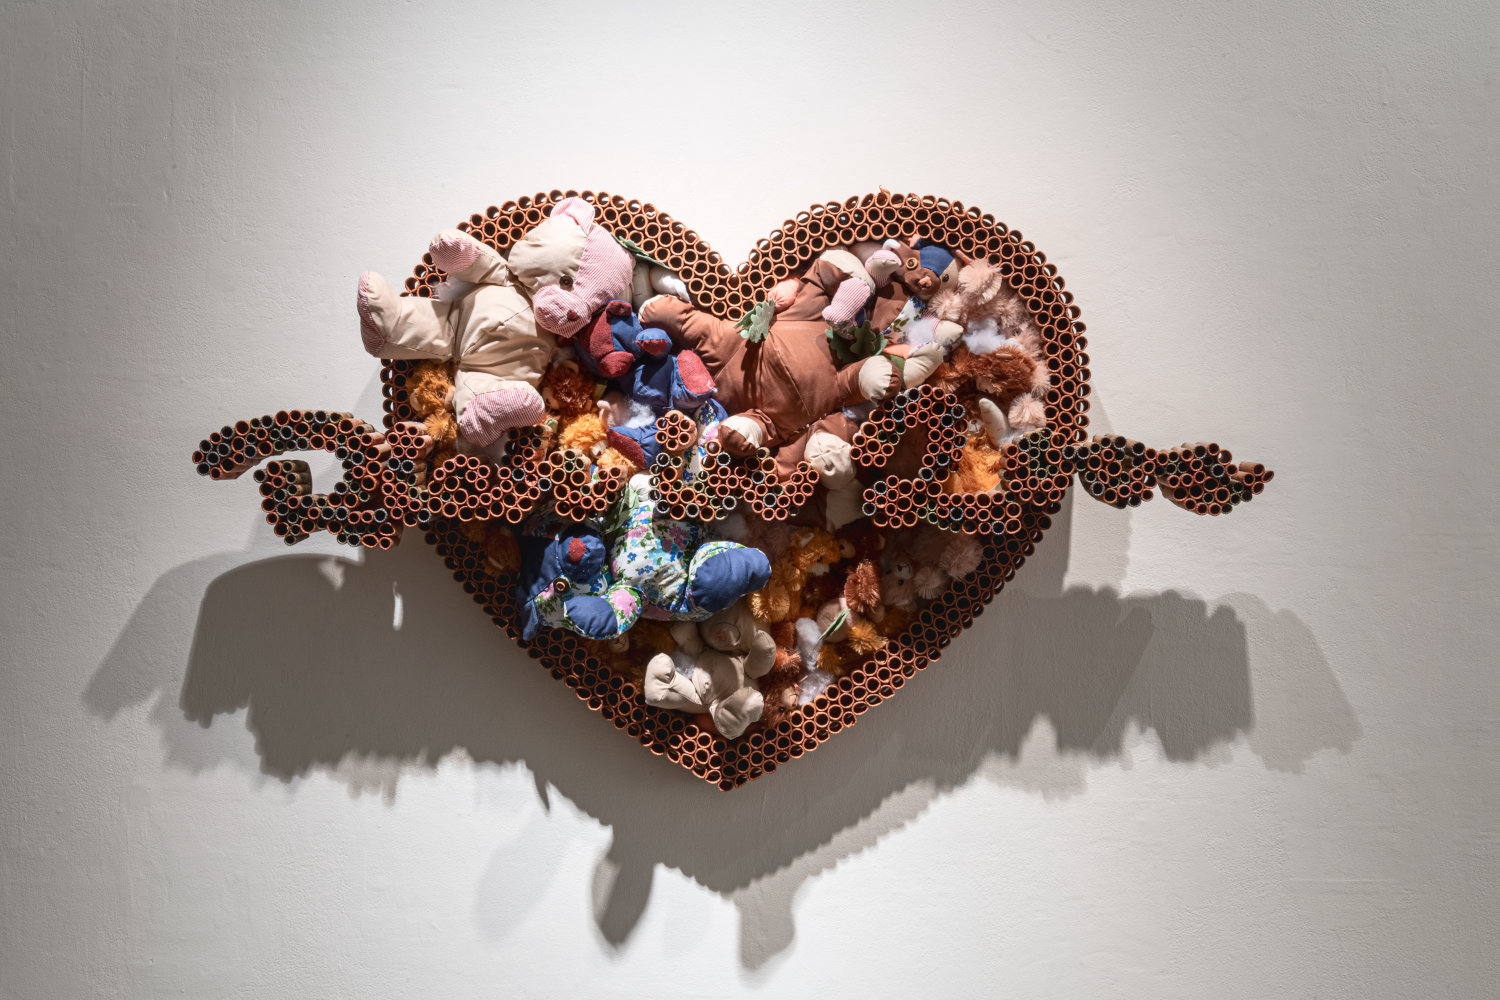 Sayer Delk artwork of Teddy bears, coin rolls and MDF board in a heart  shape